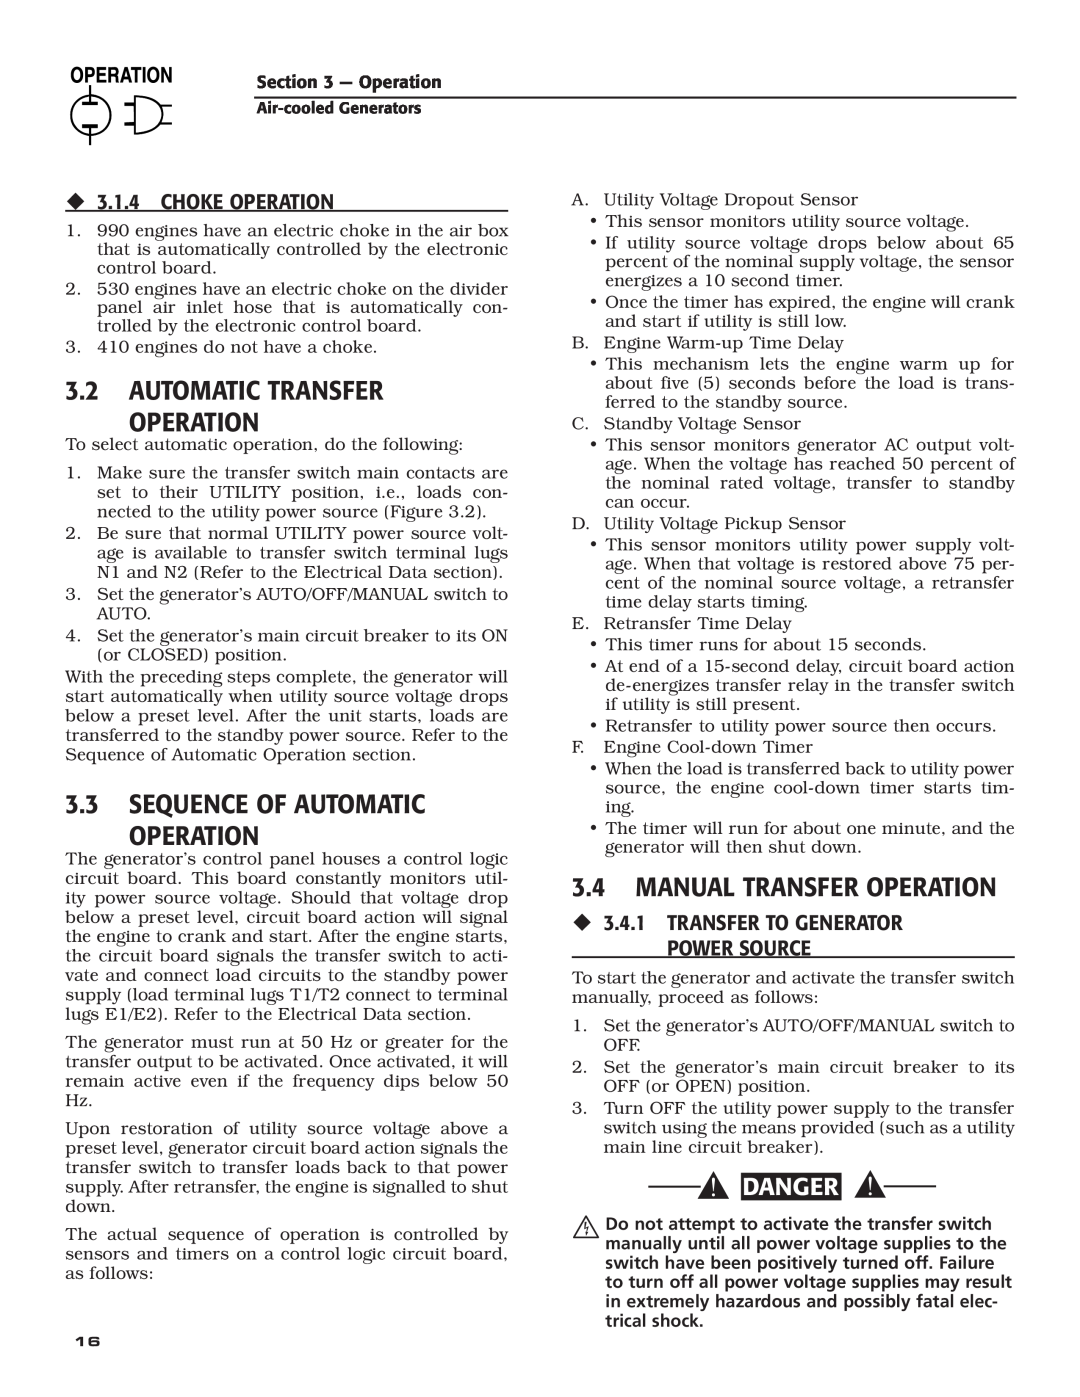 Generac Power Systems 5255, 5252 Automatic Transfer Operation, Sequence Of Automatic Operation, Manual Transfer Operation 